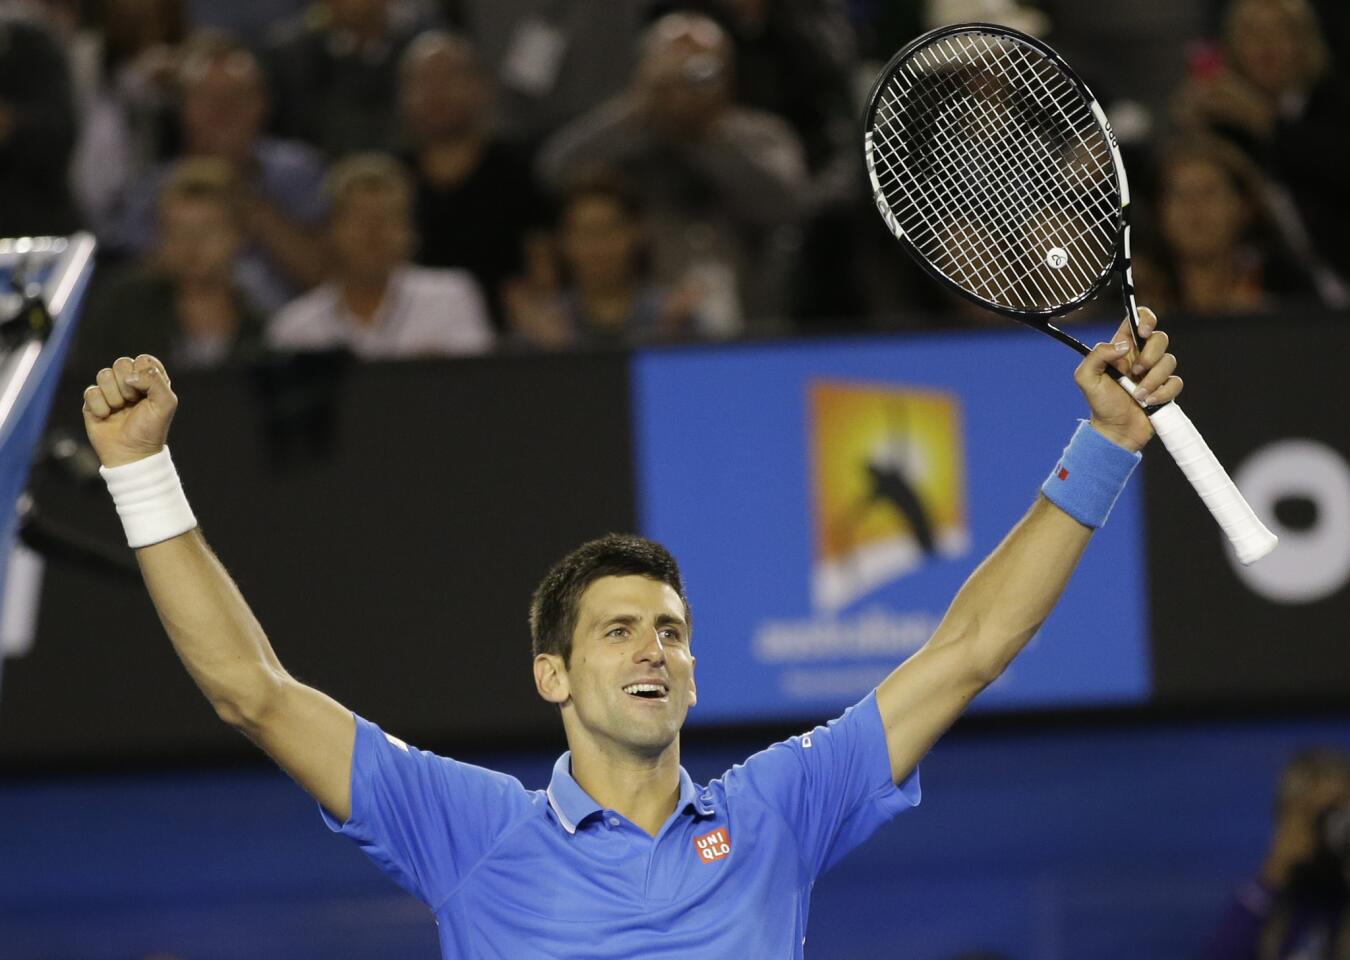 Novak Djokovic of Serbia celebrates after defeating Andy Murray in four sets to win the Australian Open championship on Sunday in Melbourne.